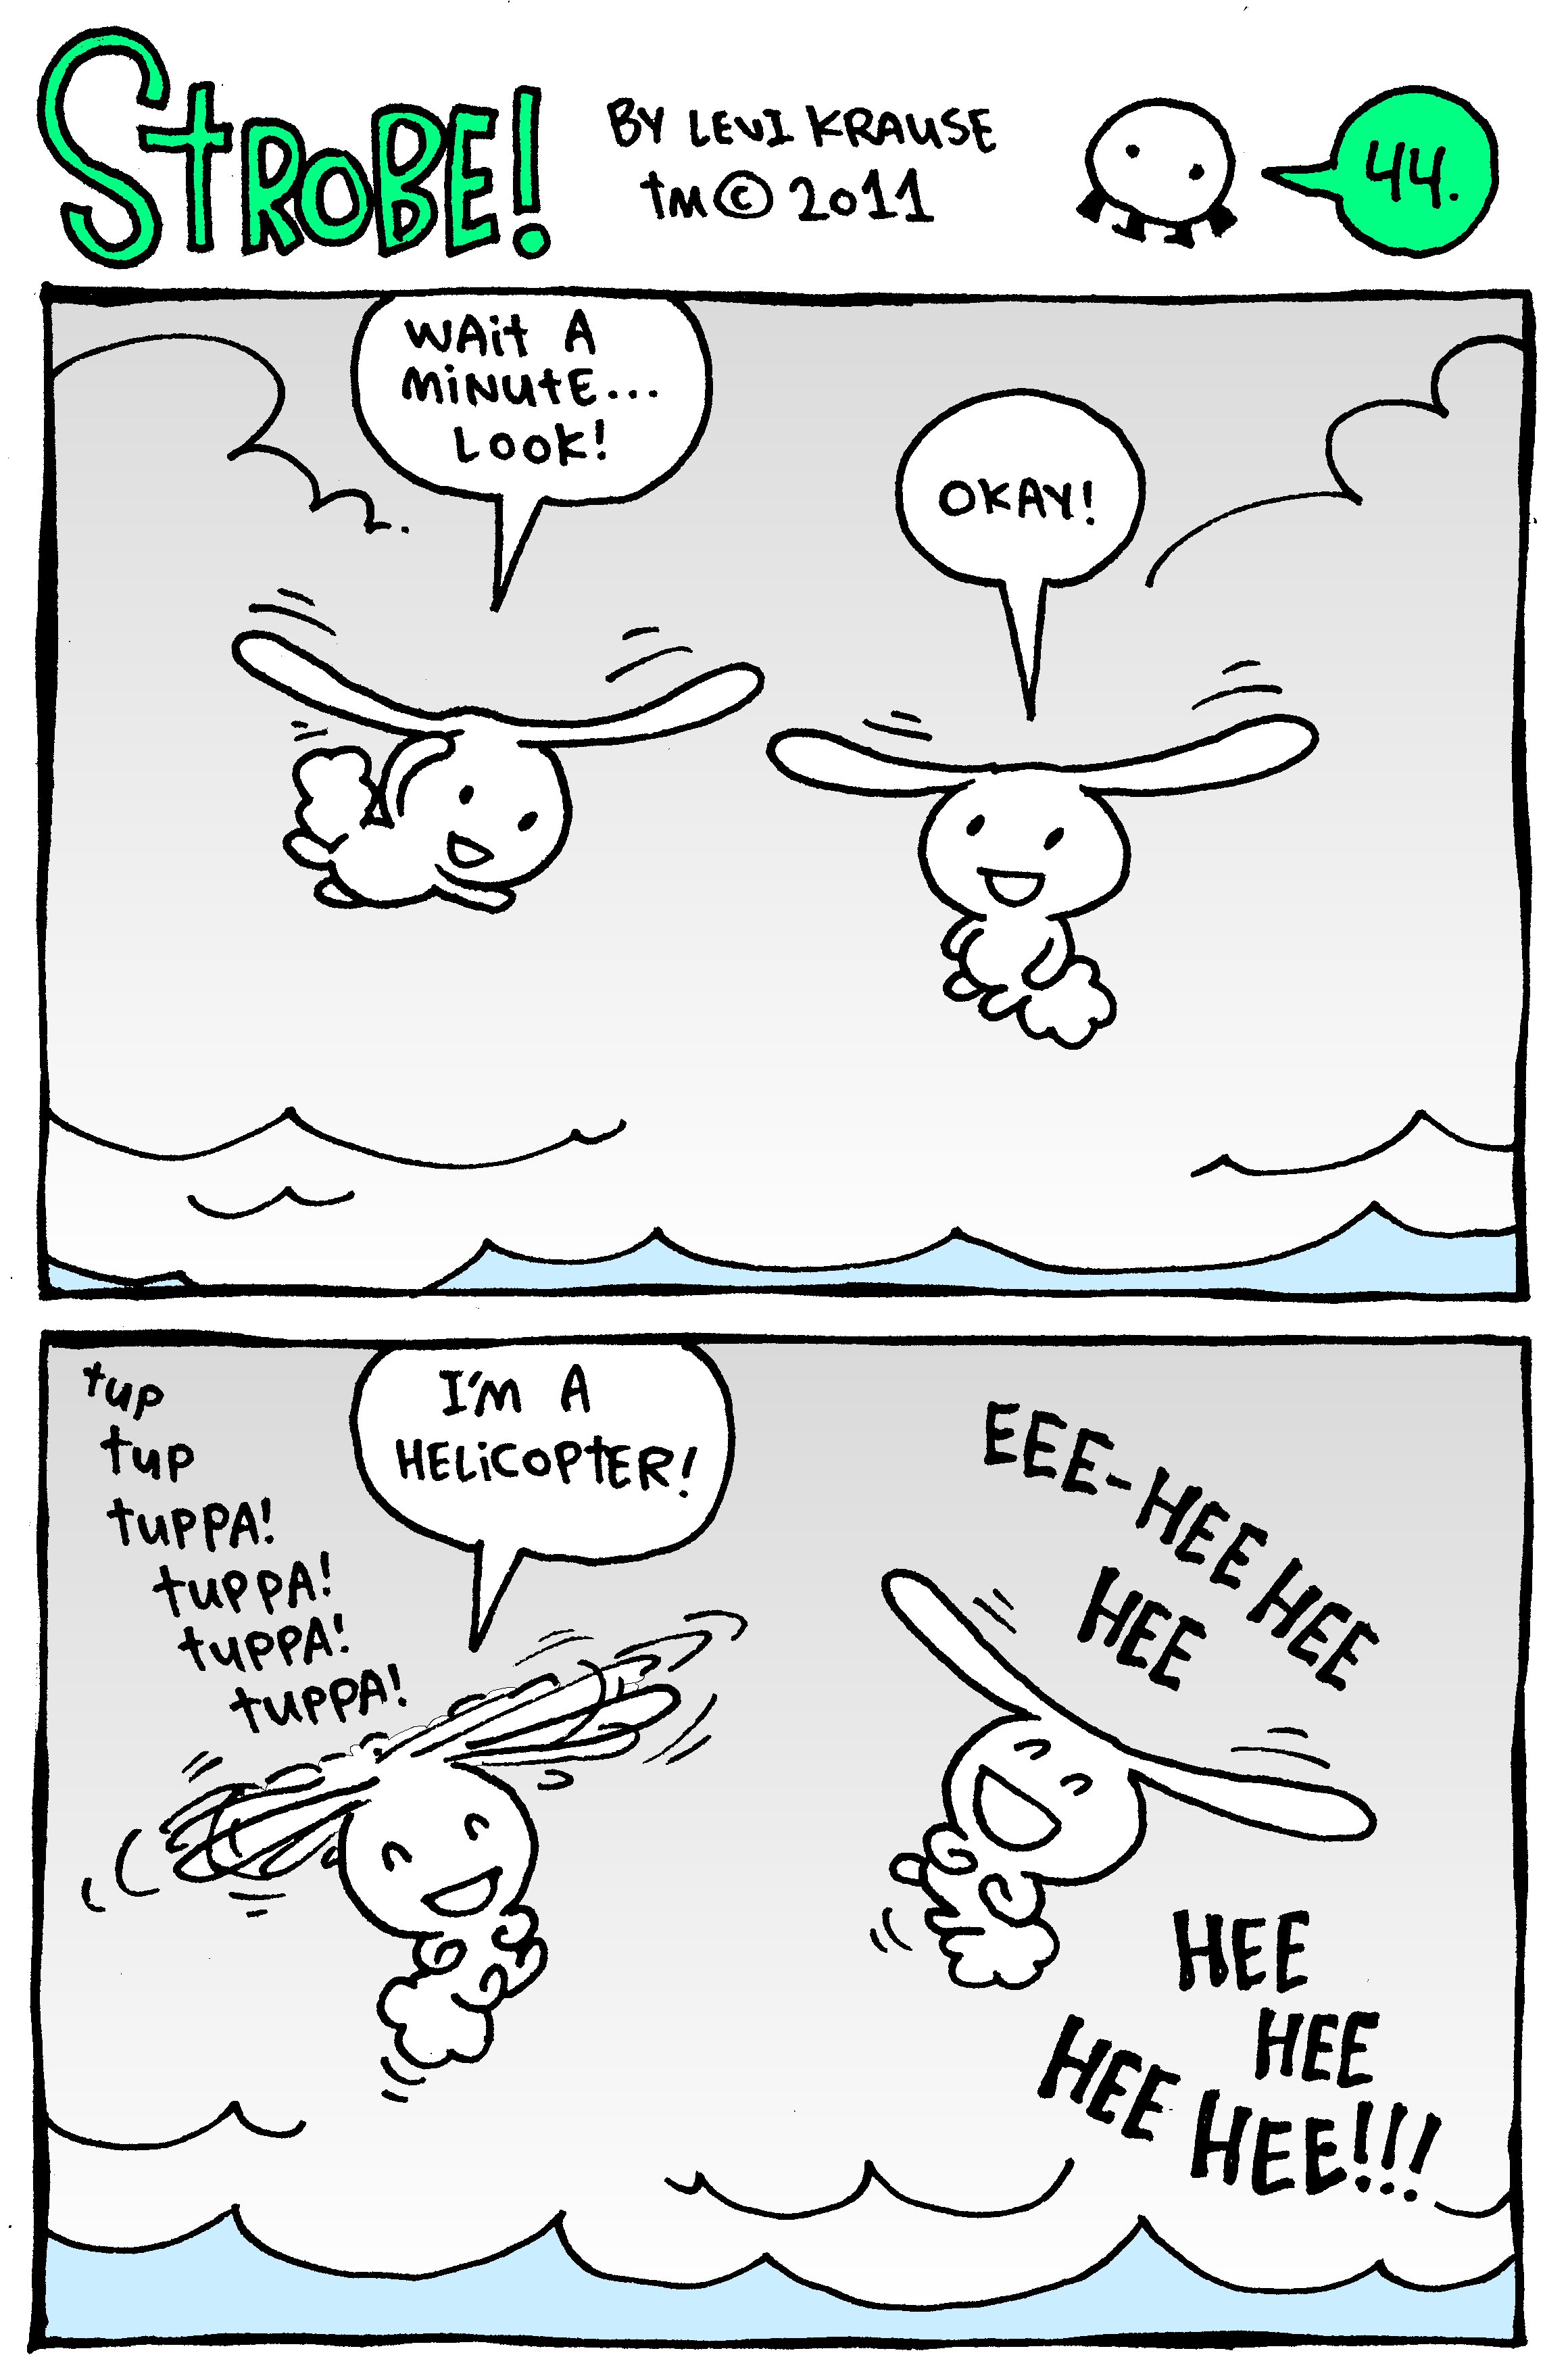 Hey, this is a kid-friendly strip!  Try “hecka-copter.”